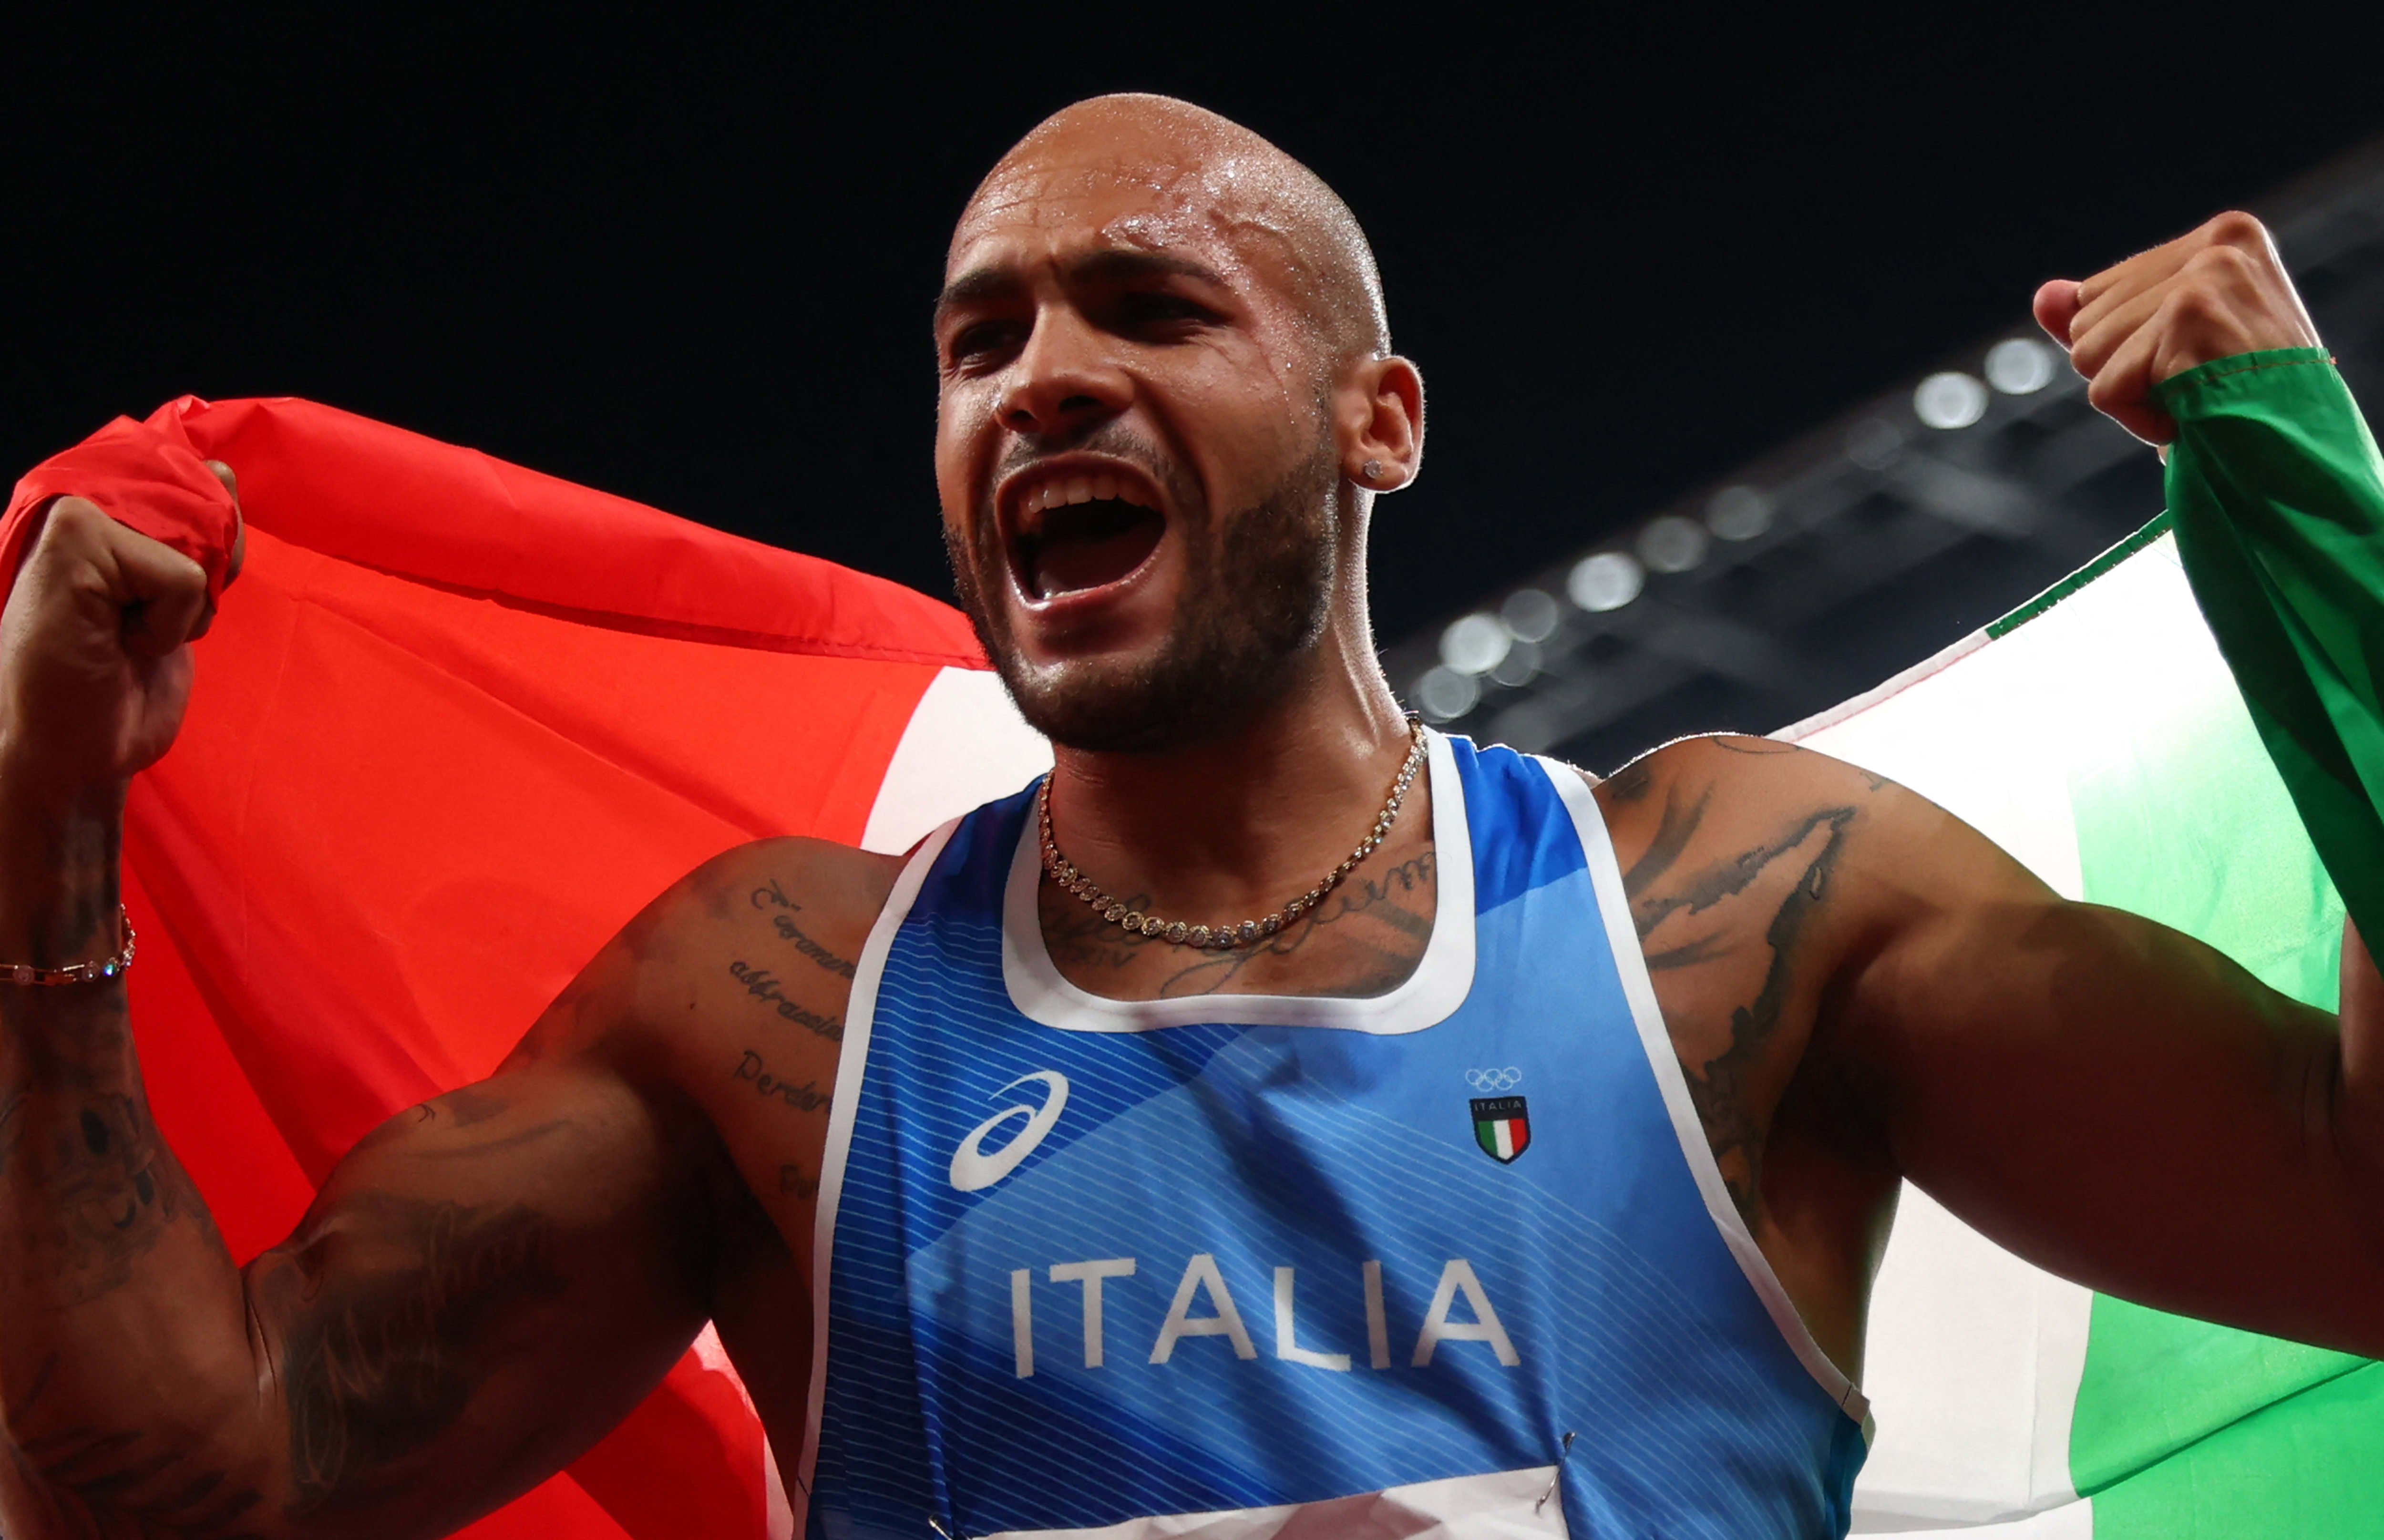 Lamont Marcell Jacobs of Italy reacts after winning Athletics men's 100m in Tokyo Olympic Games at Olympic Stadium in Tokyo on 1 August 2021.